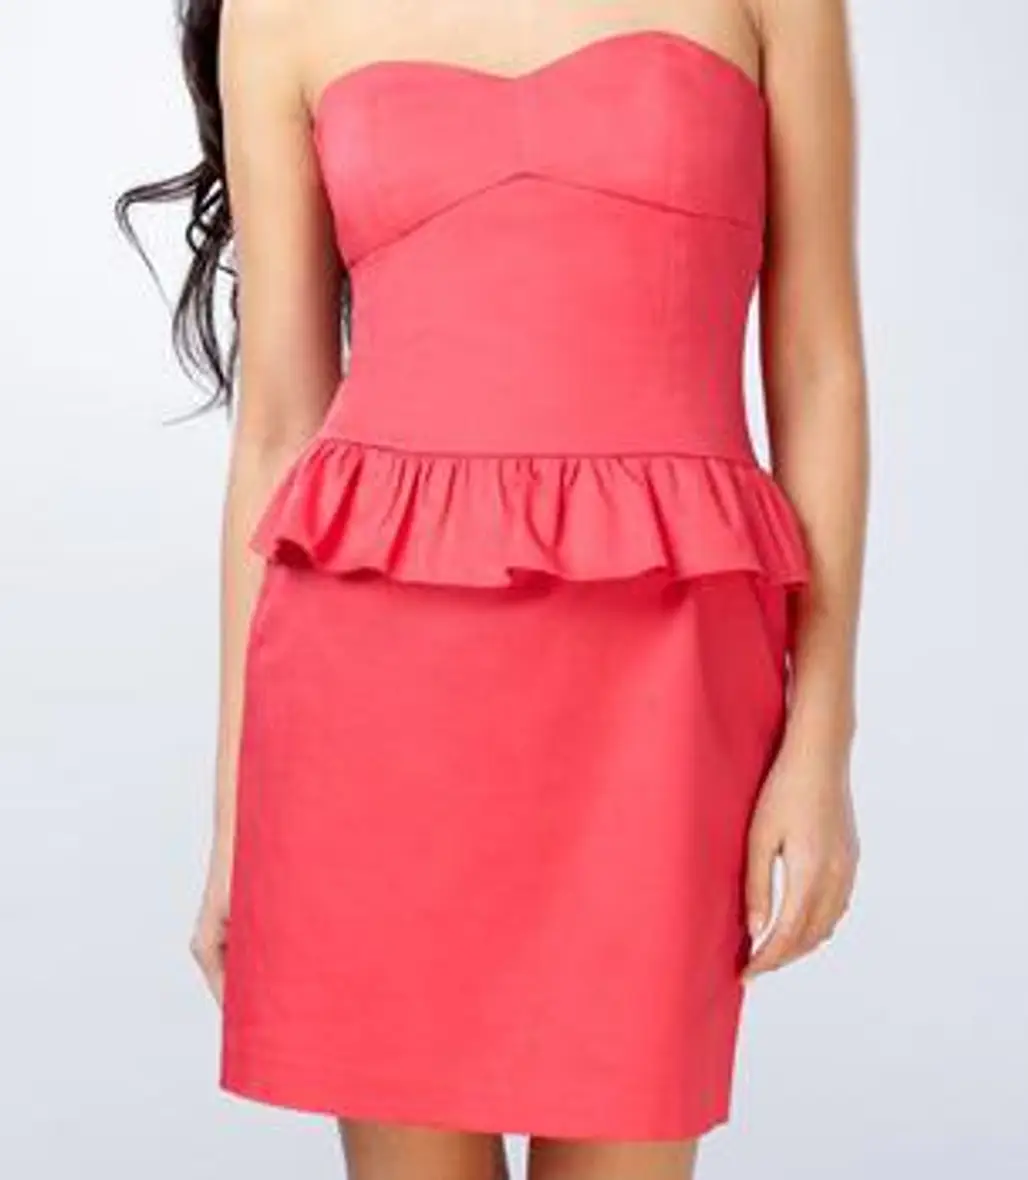 Coral Peplum Dress from Fred Flare - $48